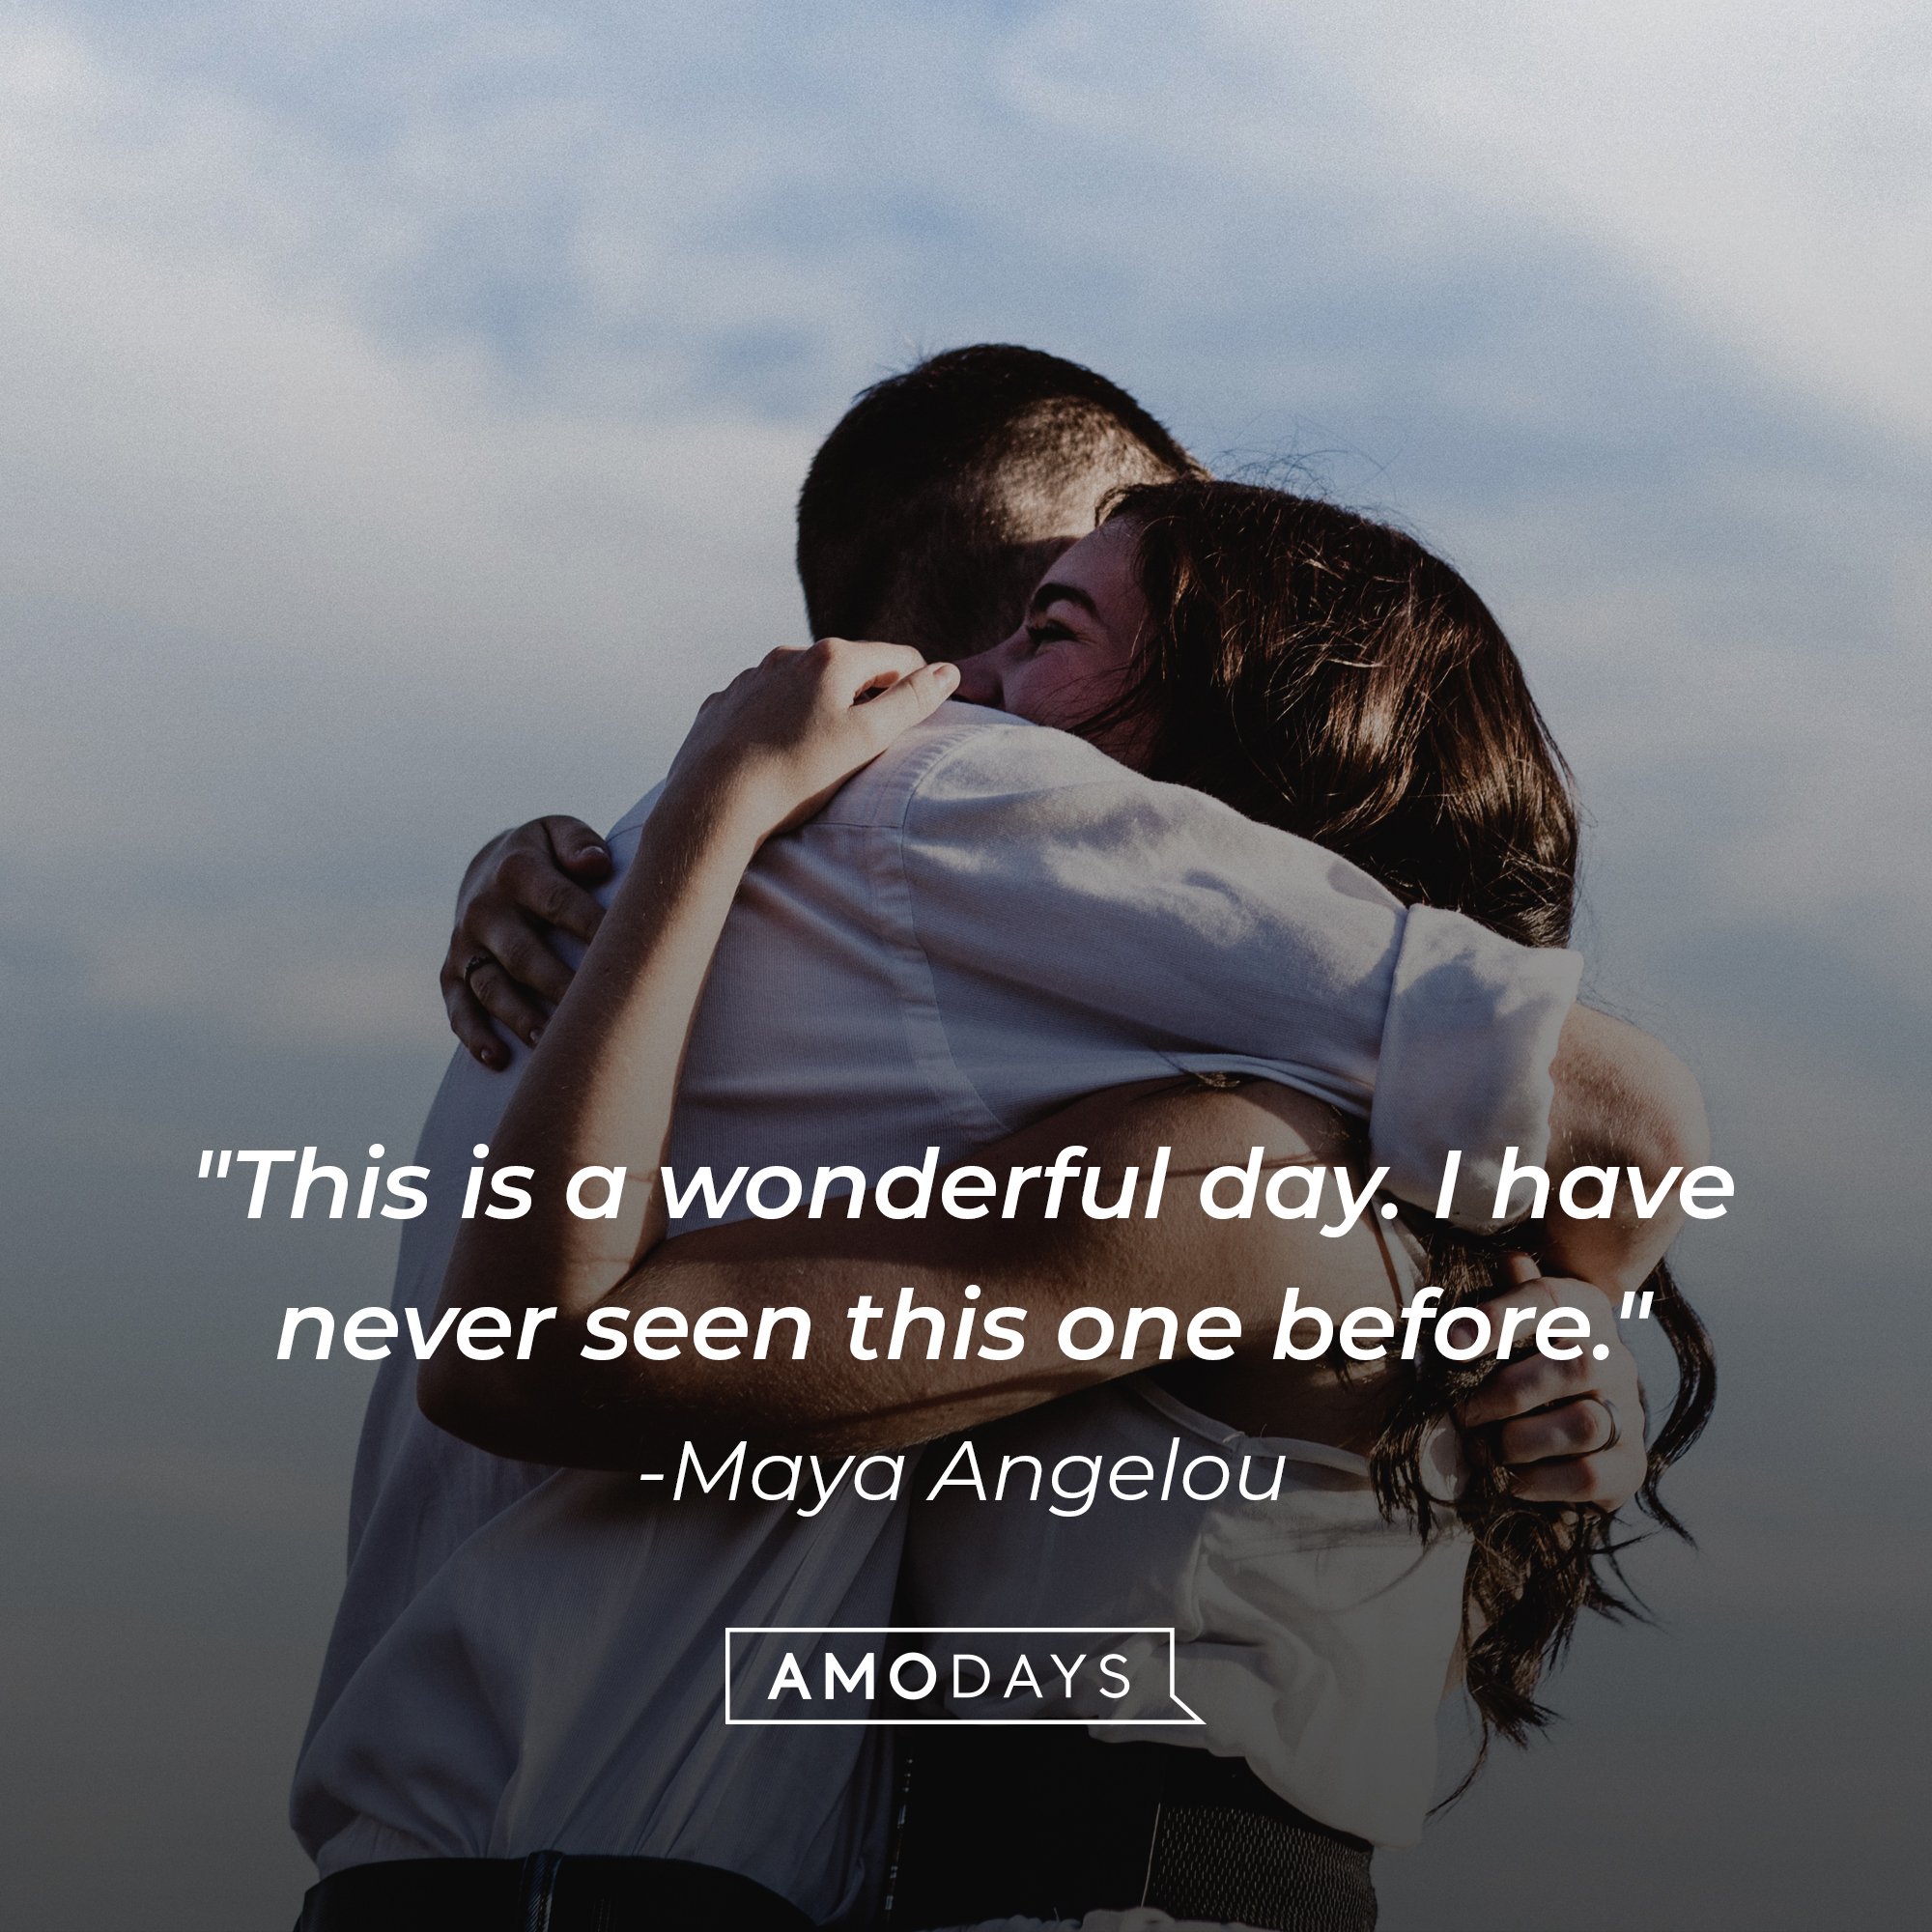 Maya Angelou’s quote: "This is a wonderful day. I have never seen this one before." | Image: AmoDays